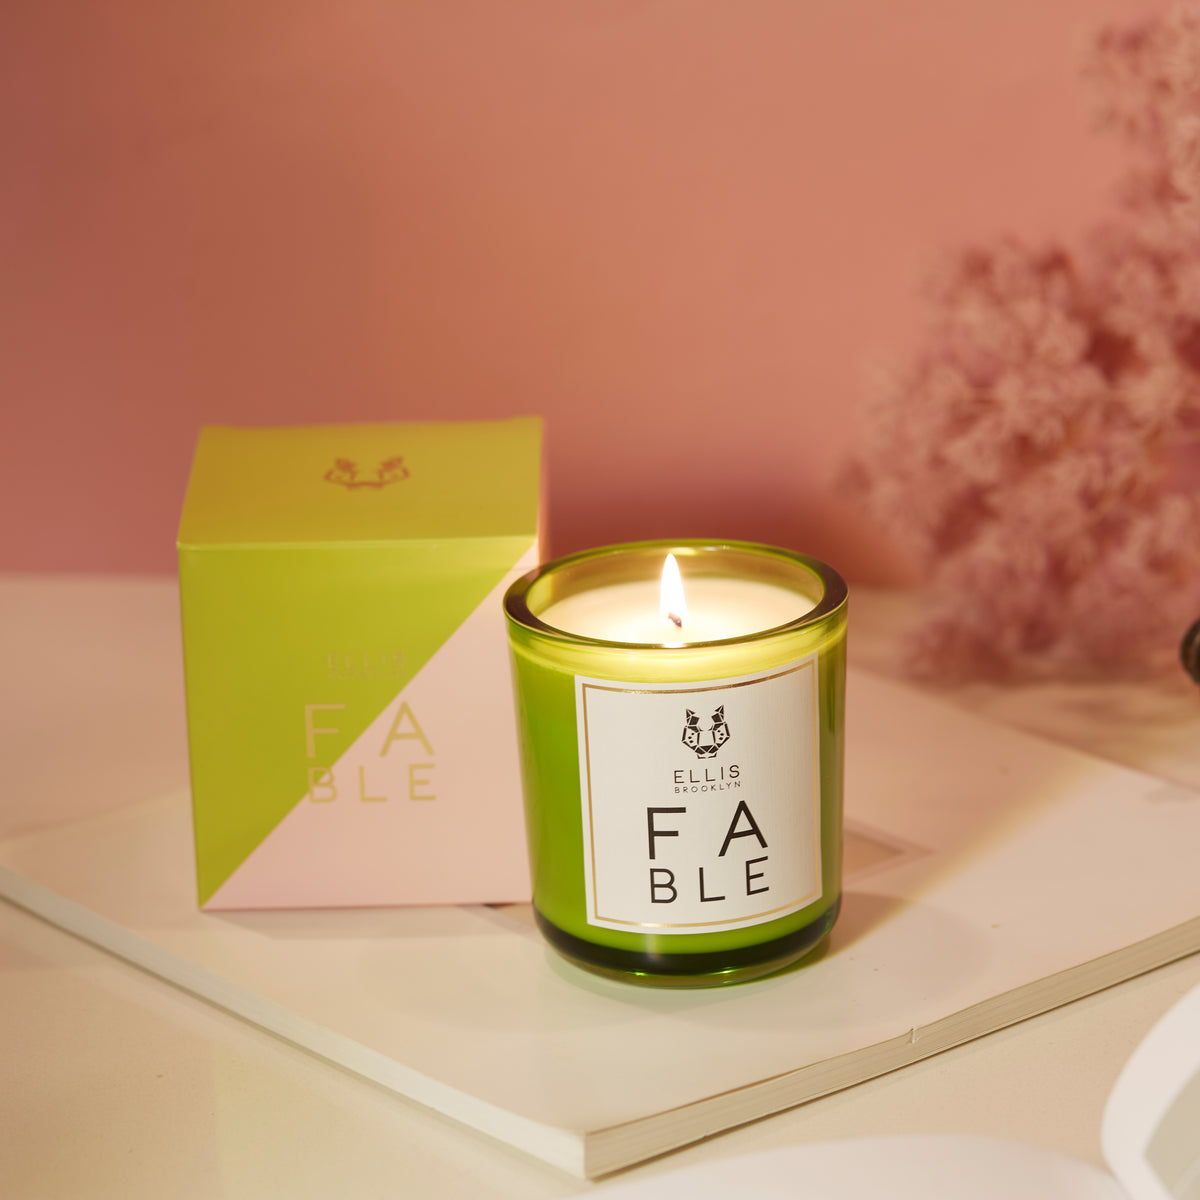 FABLE candle